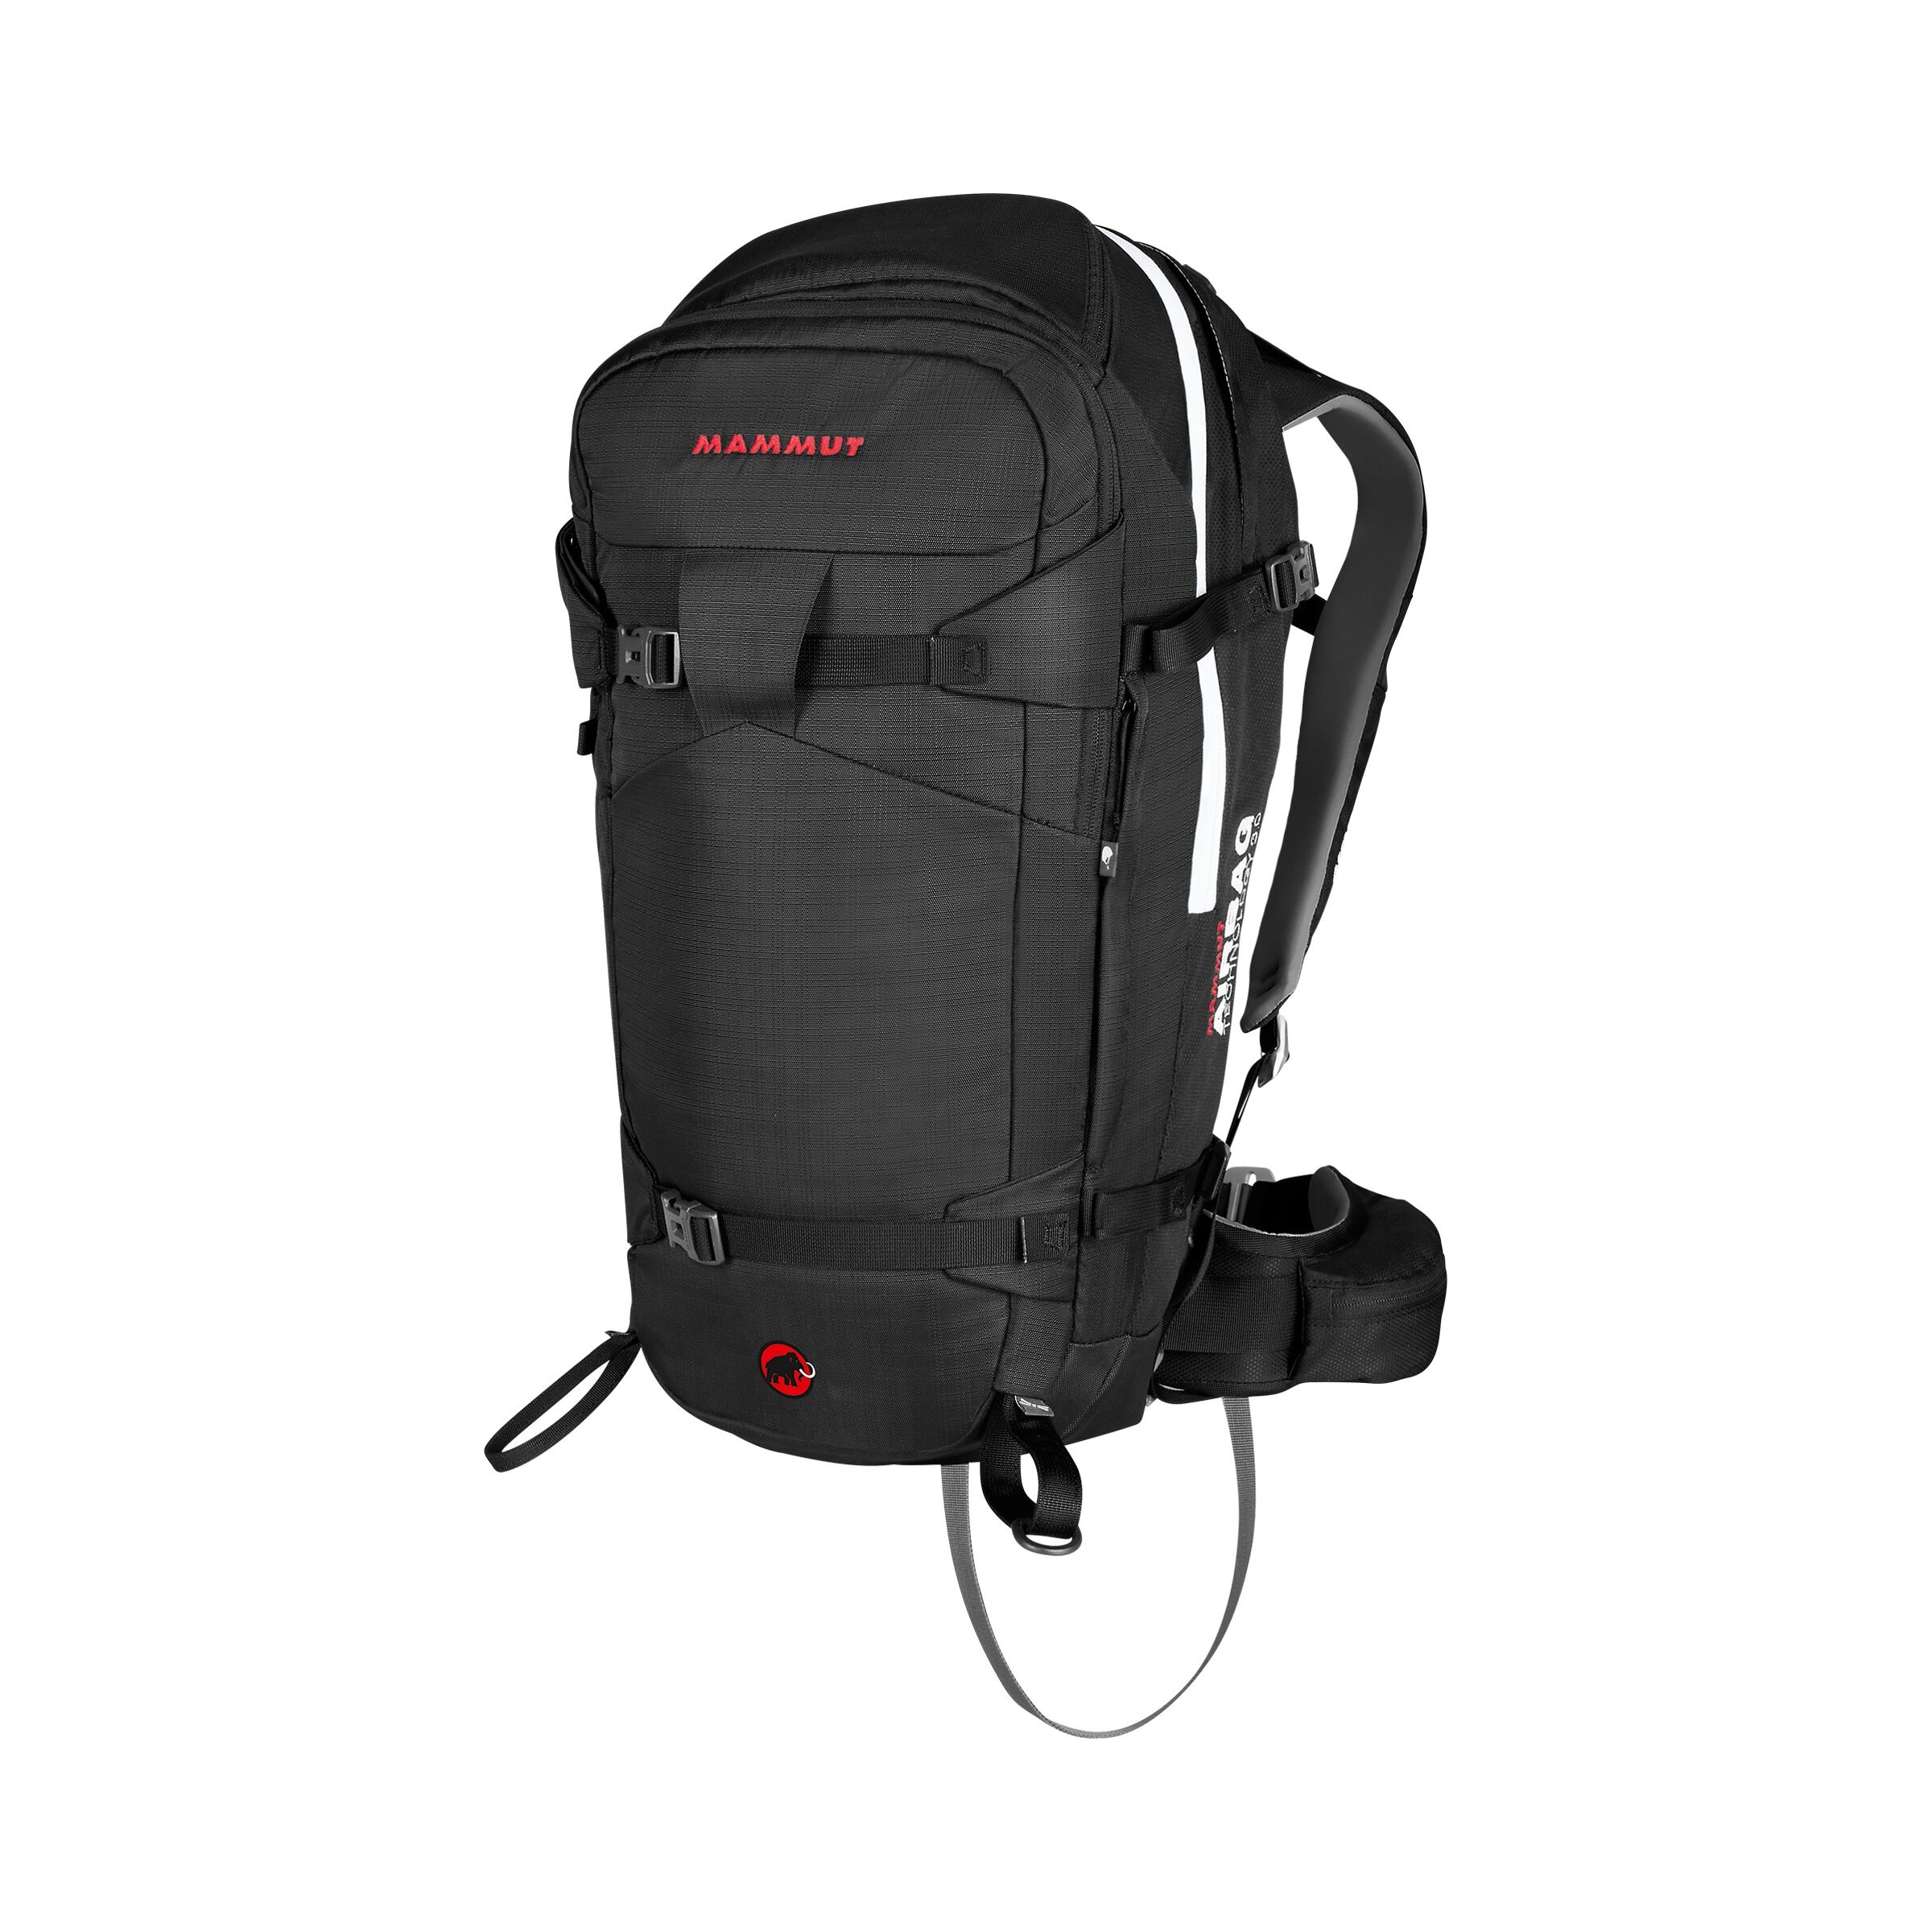 Mammut Pro Removable Airbag 3.0 - Sac à dos airbag 45 L | Hardloop